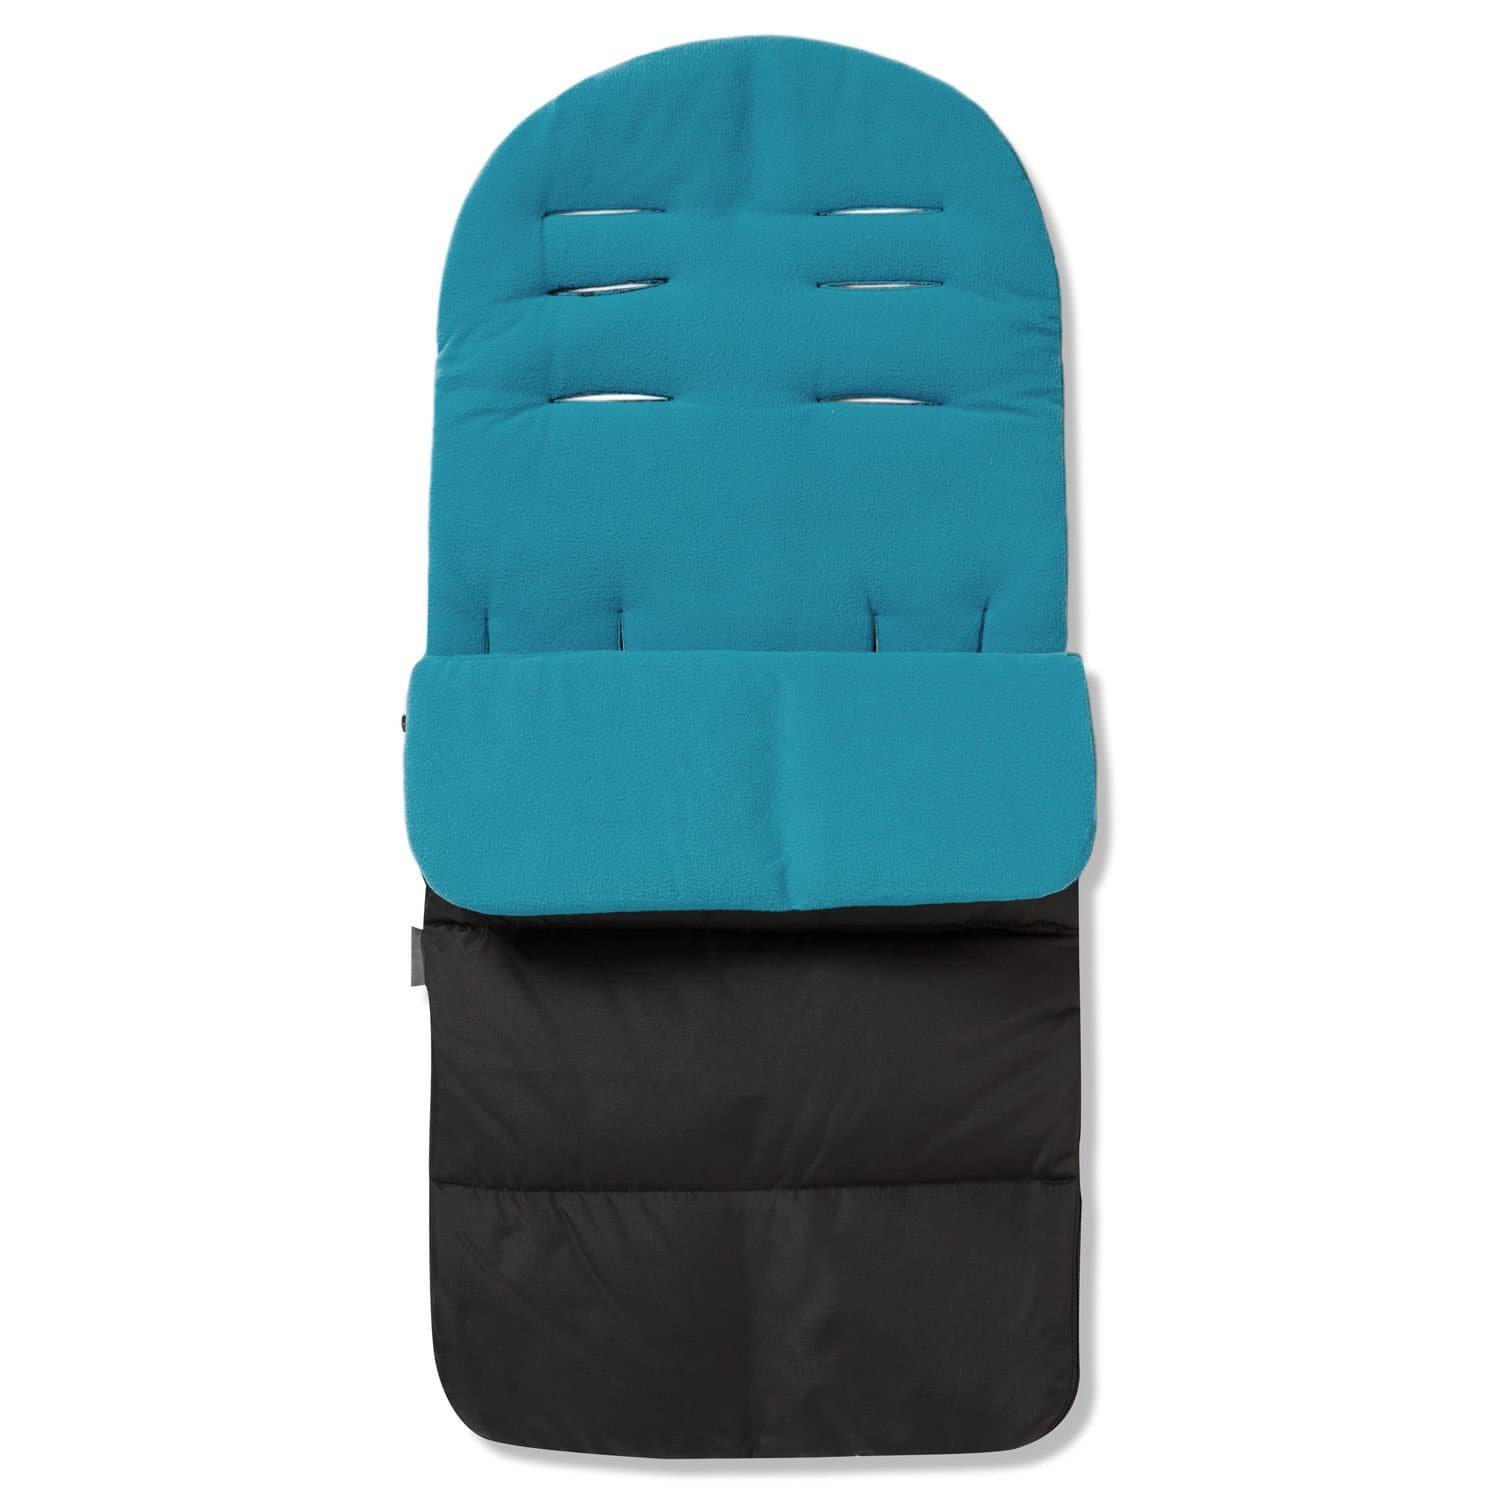 Premium Footmuff / Cosy Toes Compatible with Stokke - Ocean Blue / Fits All Models | For Your Little One